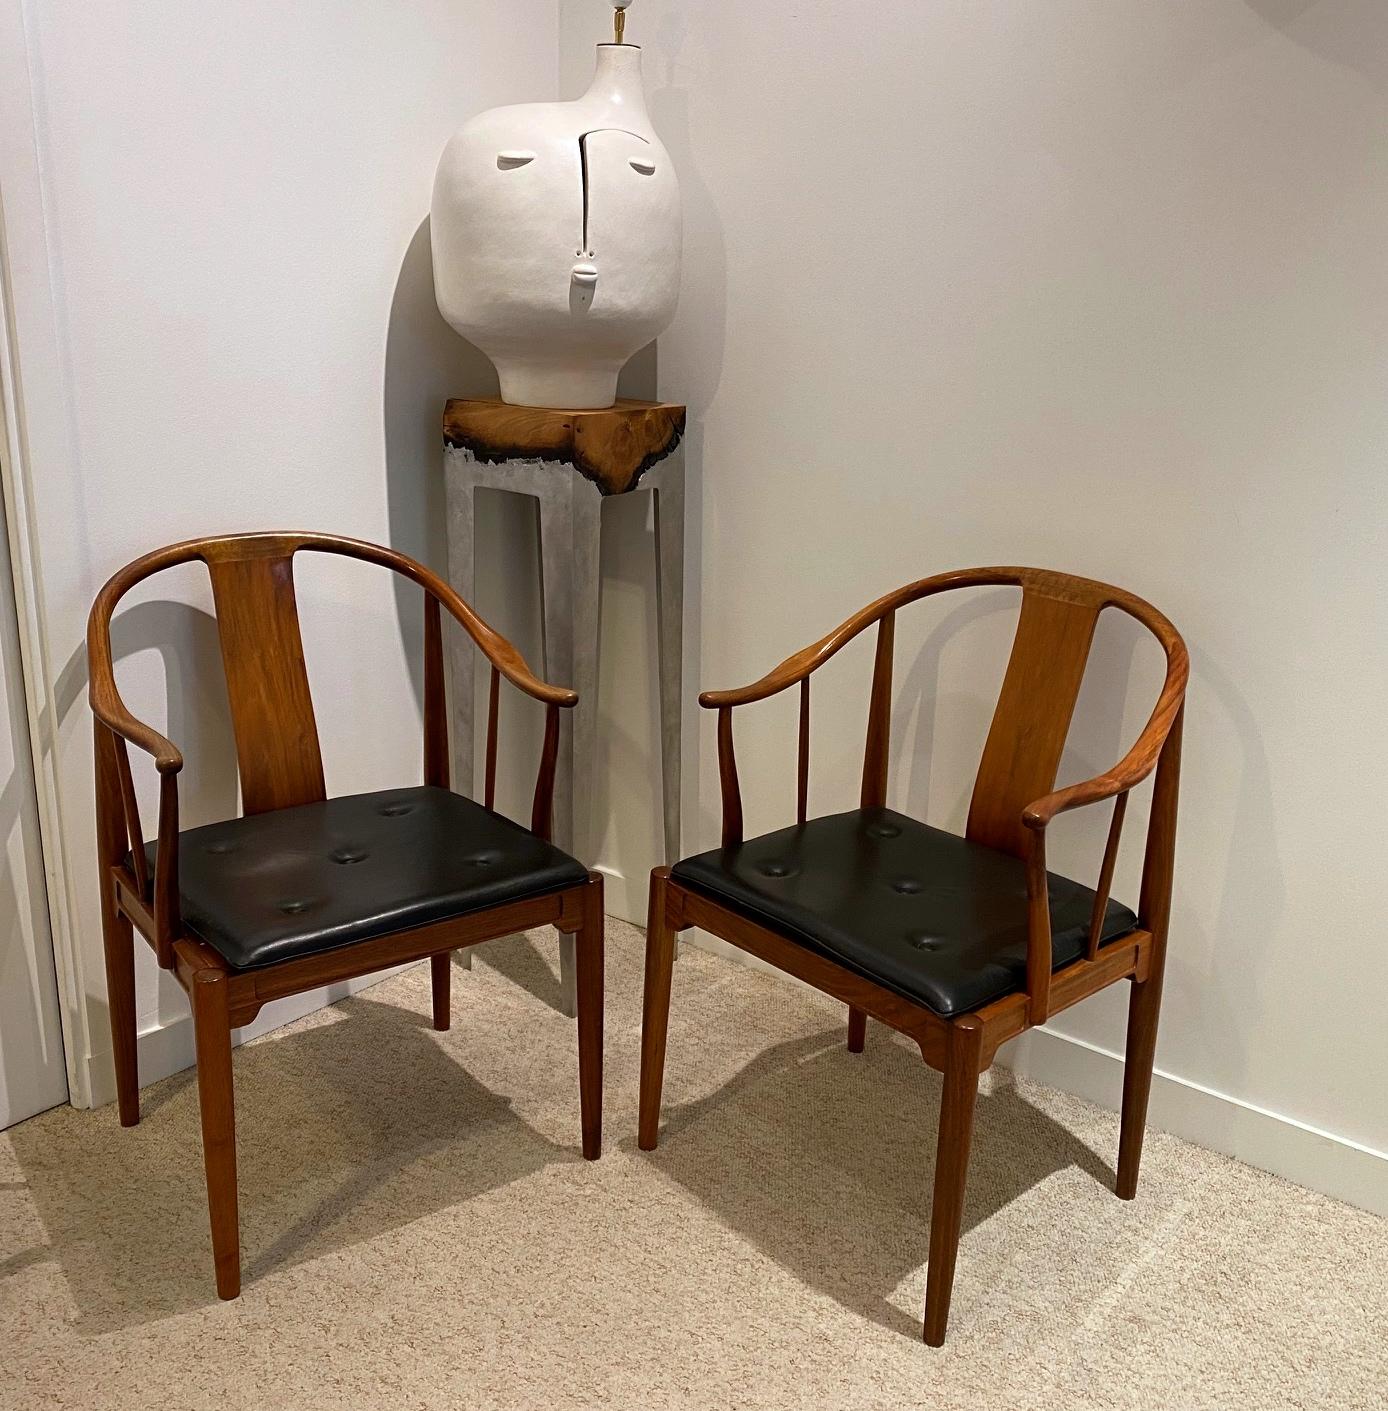 Hans J. Wegner:
 A pair of walnut armchairs “China chairs”. The China chair was designed by Hans J. Wegner in 1944.
Loose seat cushion upholstered with black leather, fitted with buttons. Model 4283. 
Manufactured 1977 by Fritz Hansen with